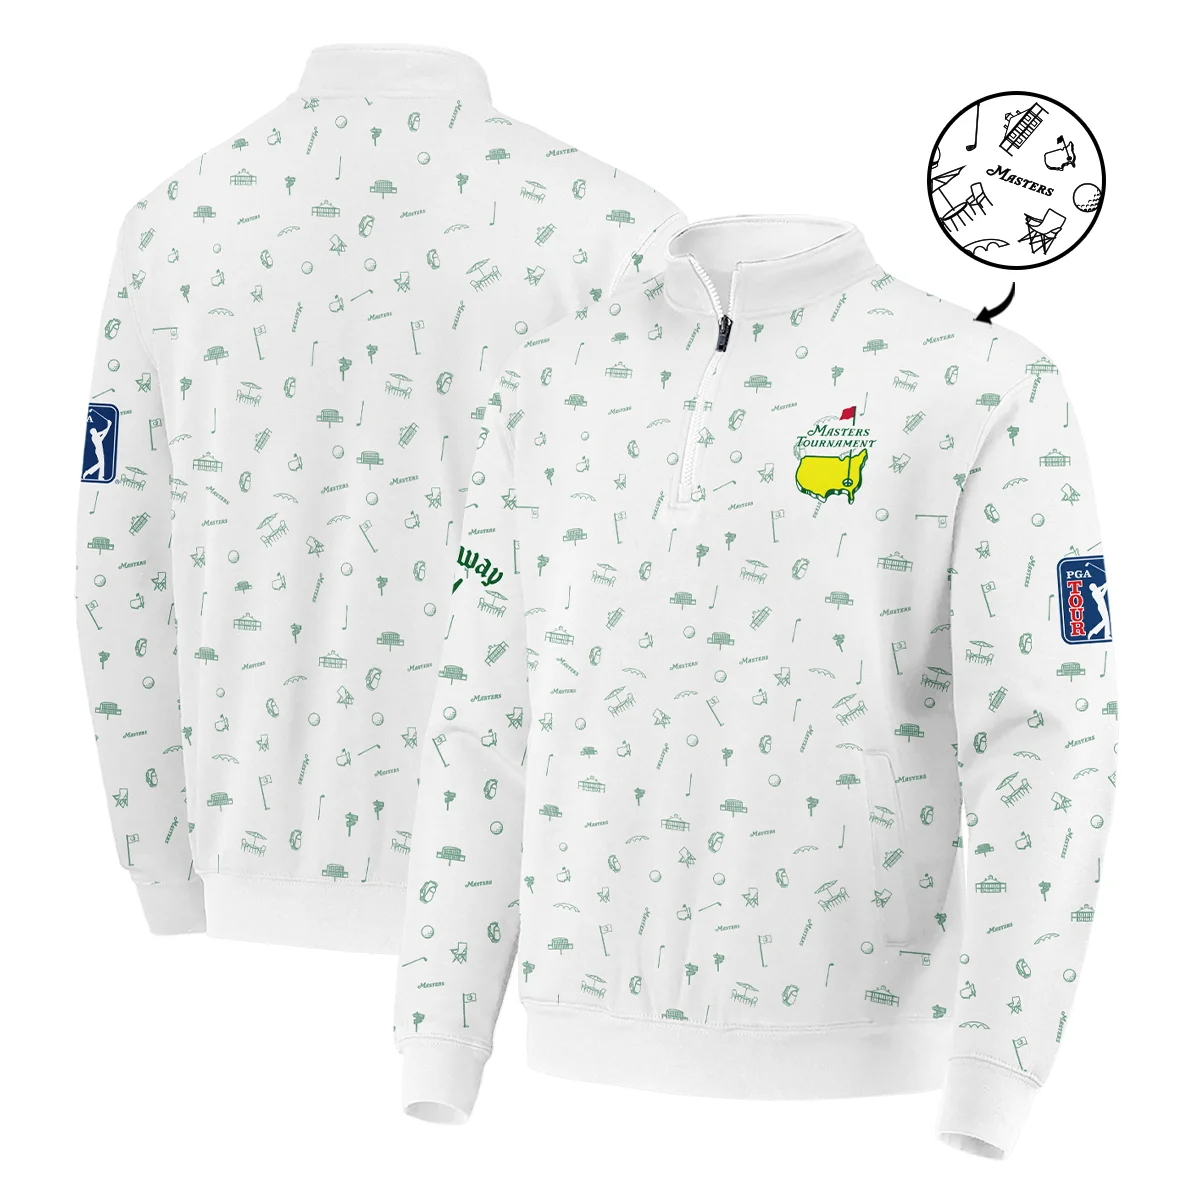 Golf Masters Tournament Callaway Bomber Jacket Augusta Icons Pattern White Green Golf Sports All Over Print Bomber Jacket